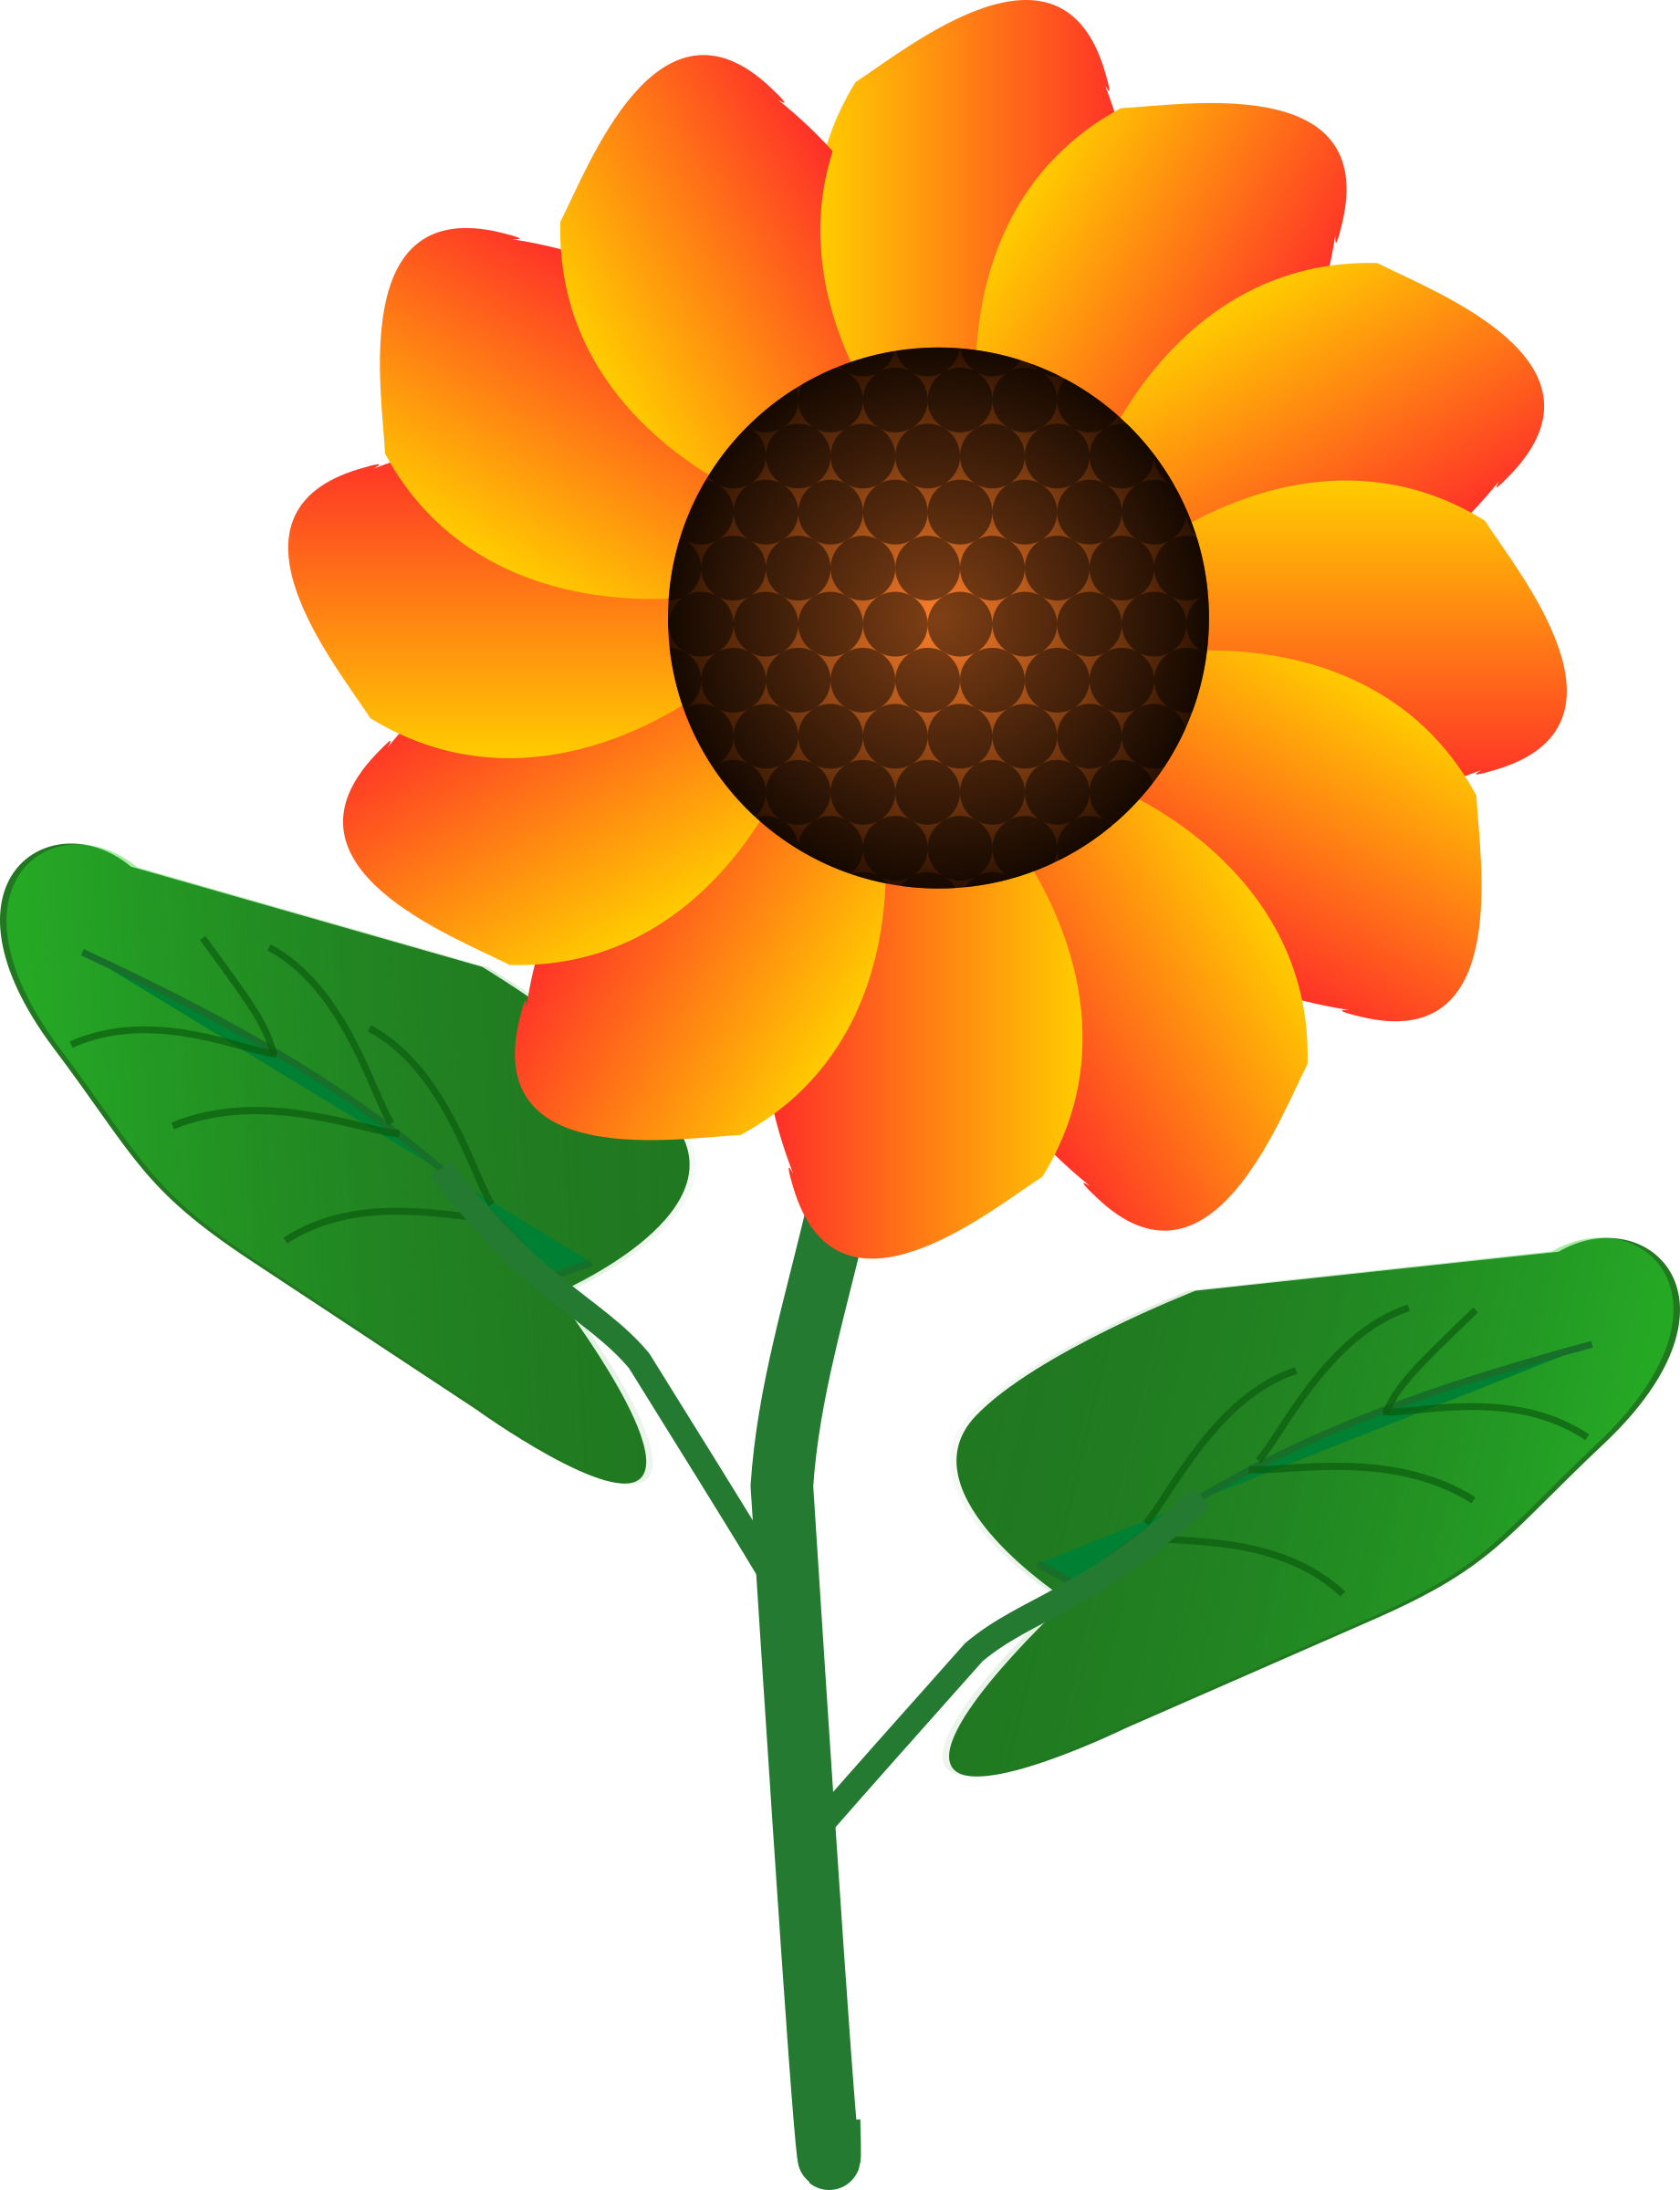 Flower By @tadmac, A Simple Cartoon Flower, On @openclipart - Portable Network Graphics (1841x2400)